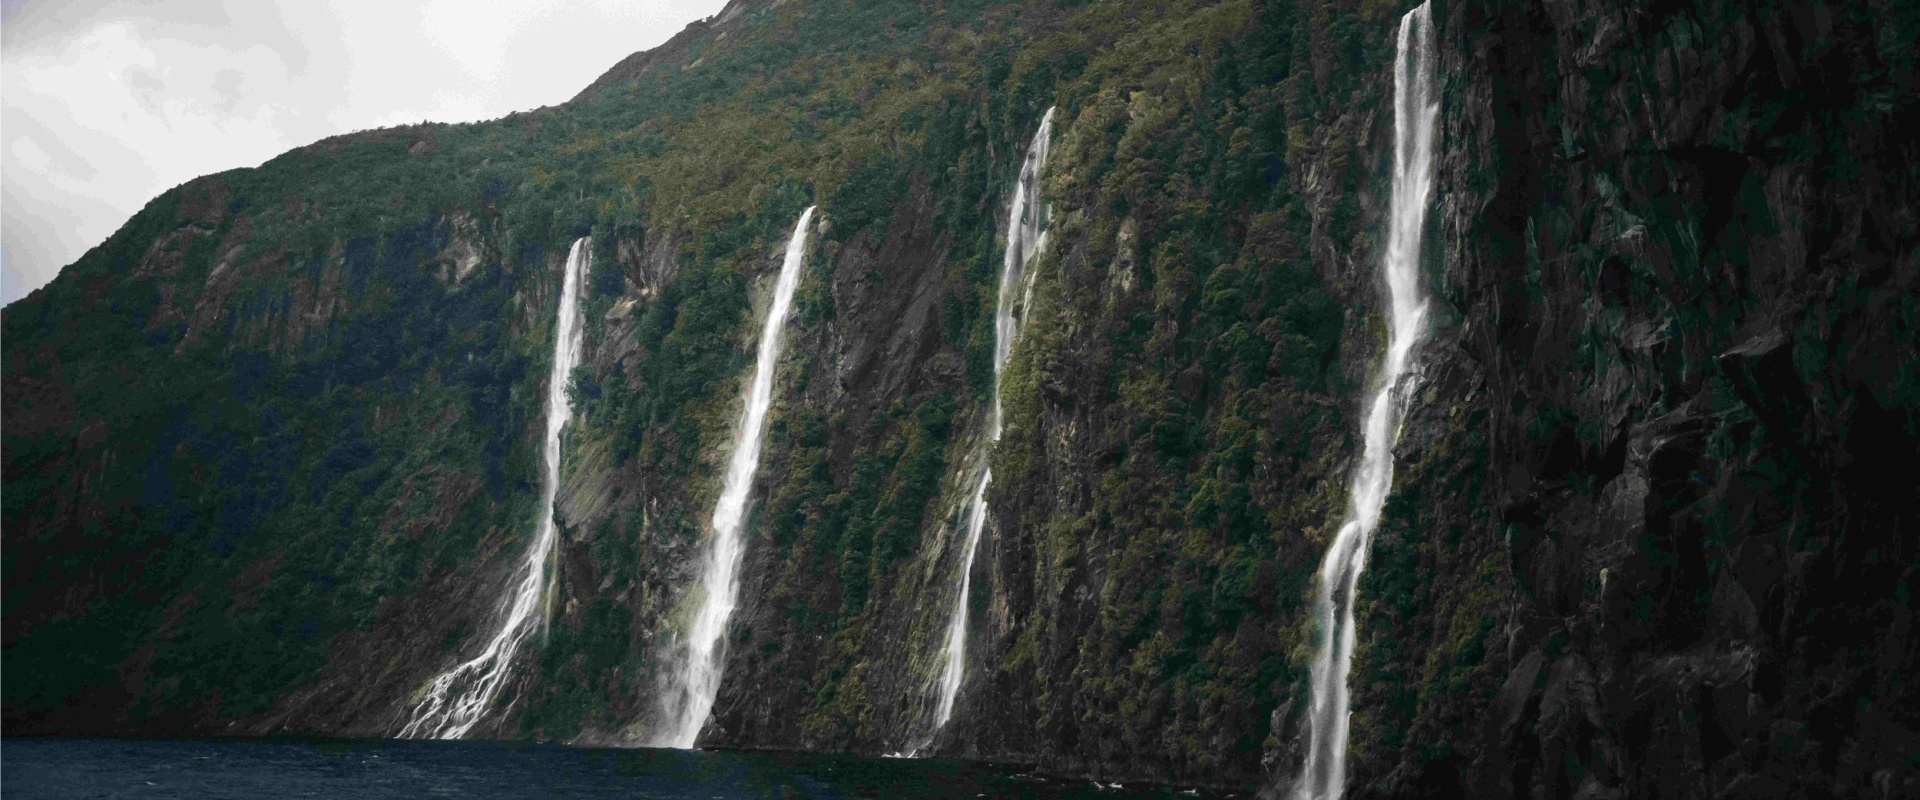 Four Sisters waterfalls cascading into the fiord